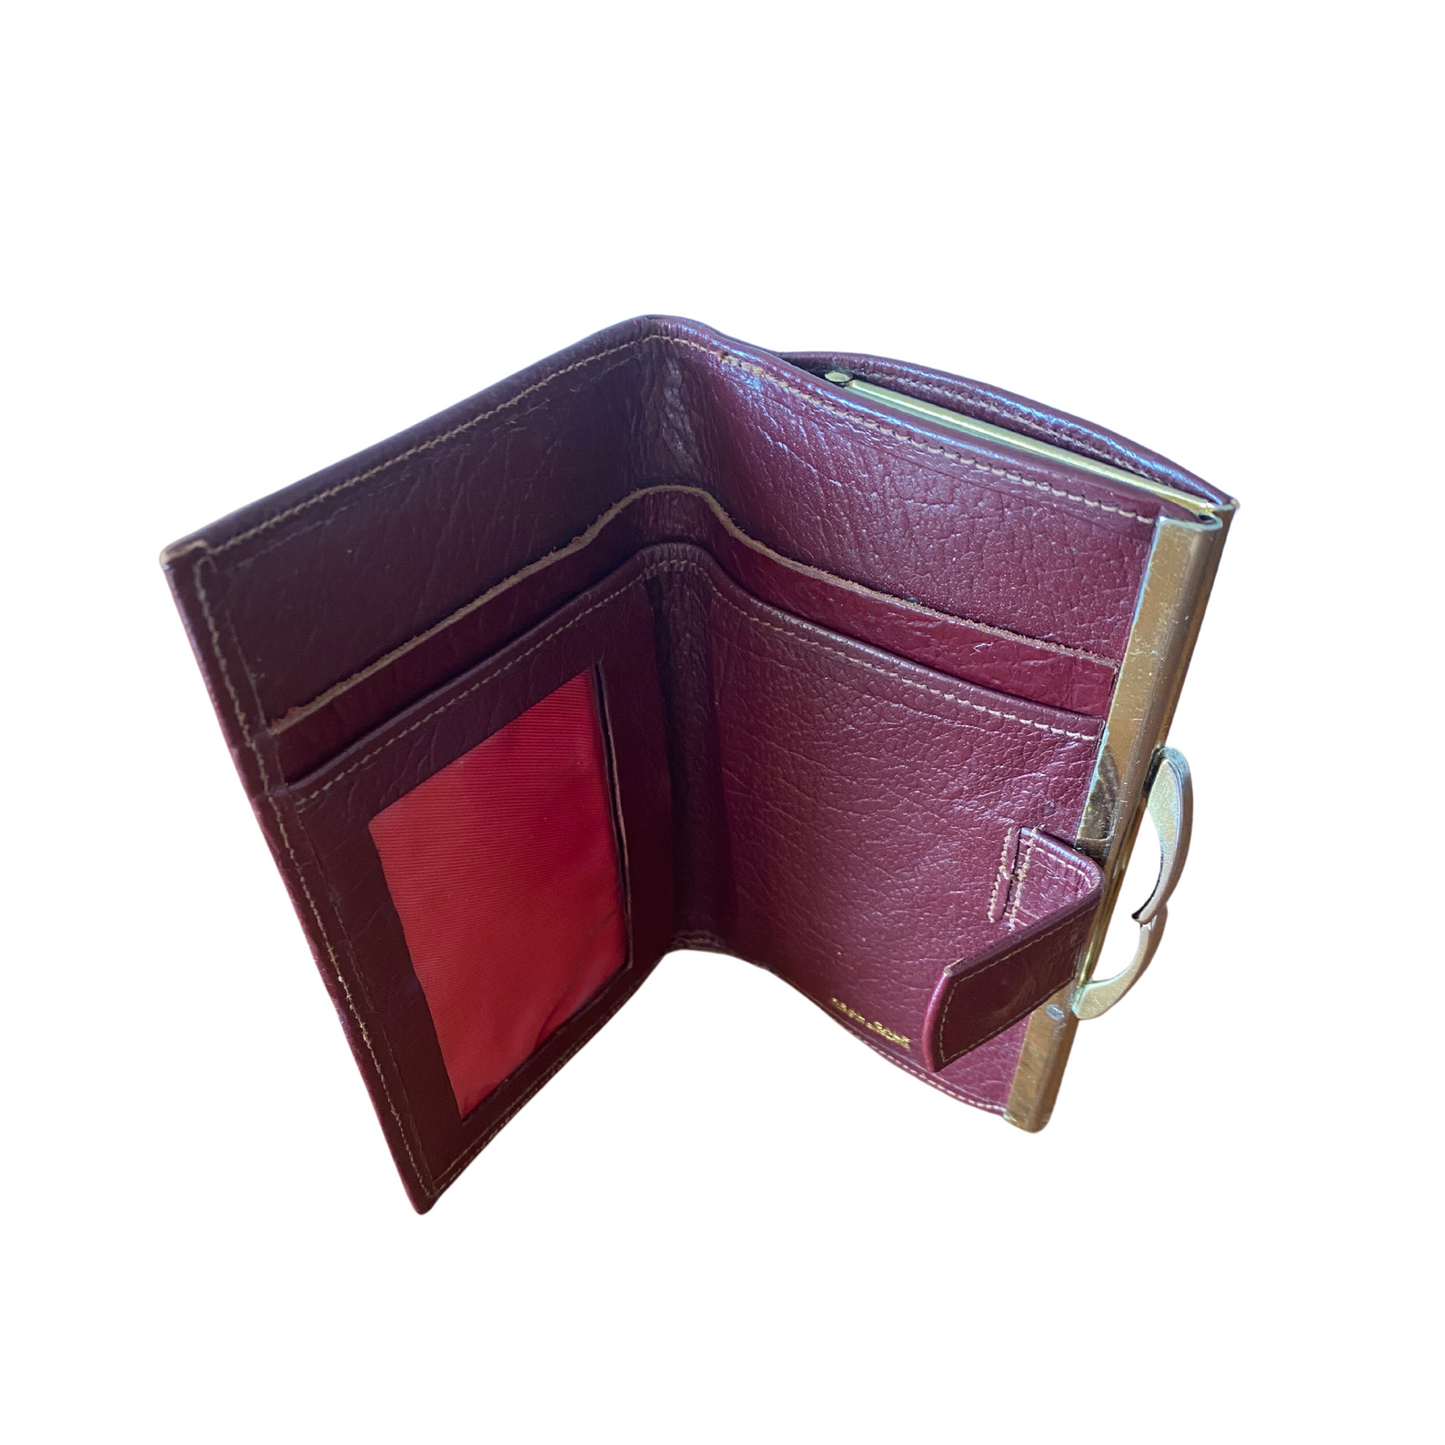 British-made red leather purse/wallet with ample space for essentials including a display pocket 